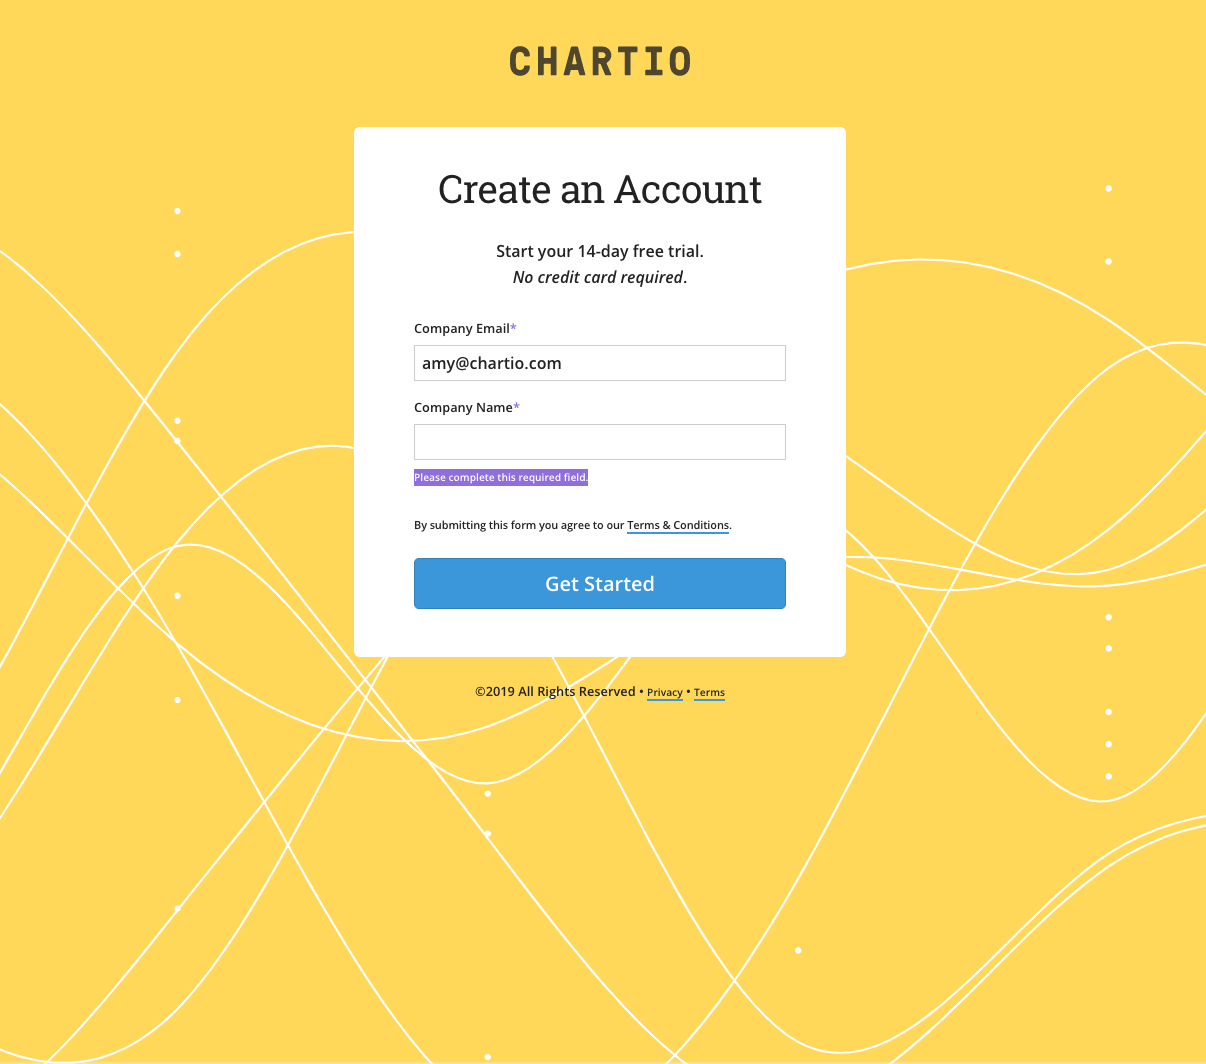 Signup for a 2 week trial on Chartio